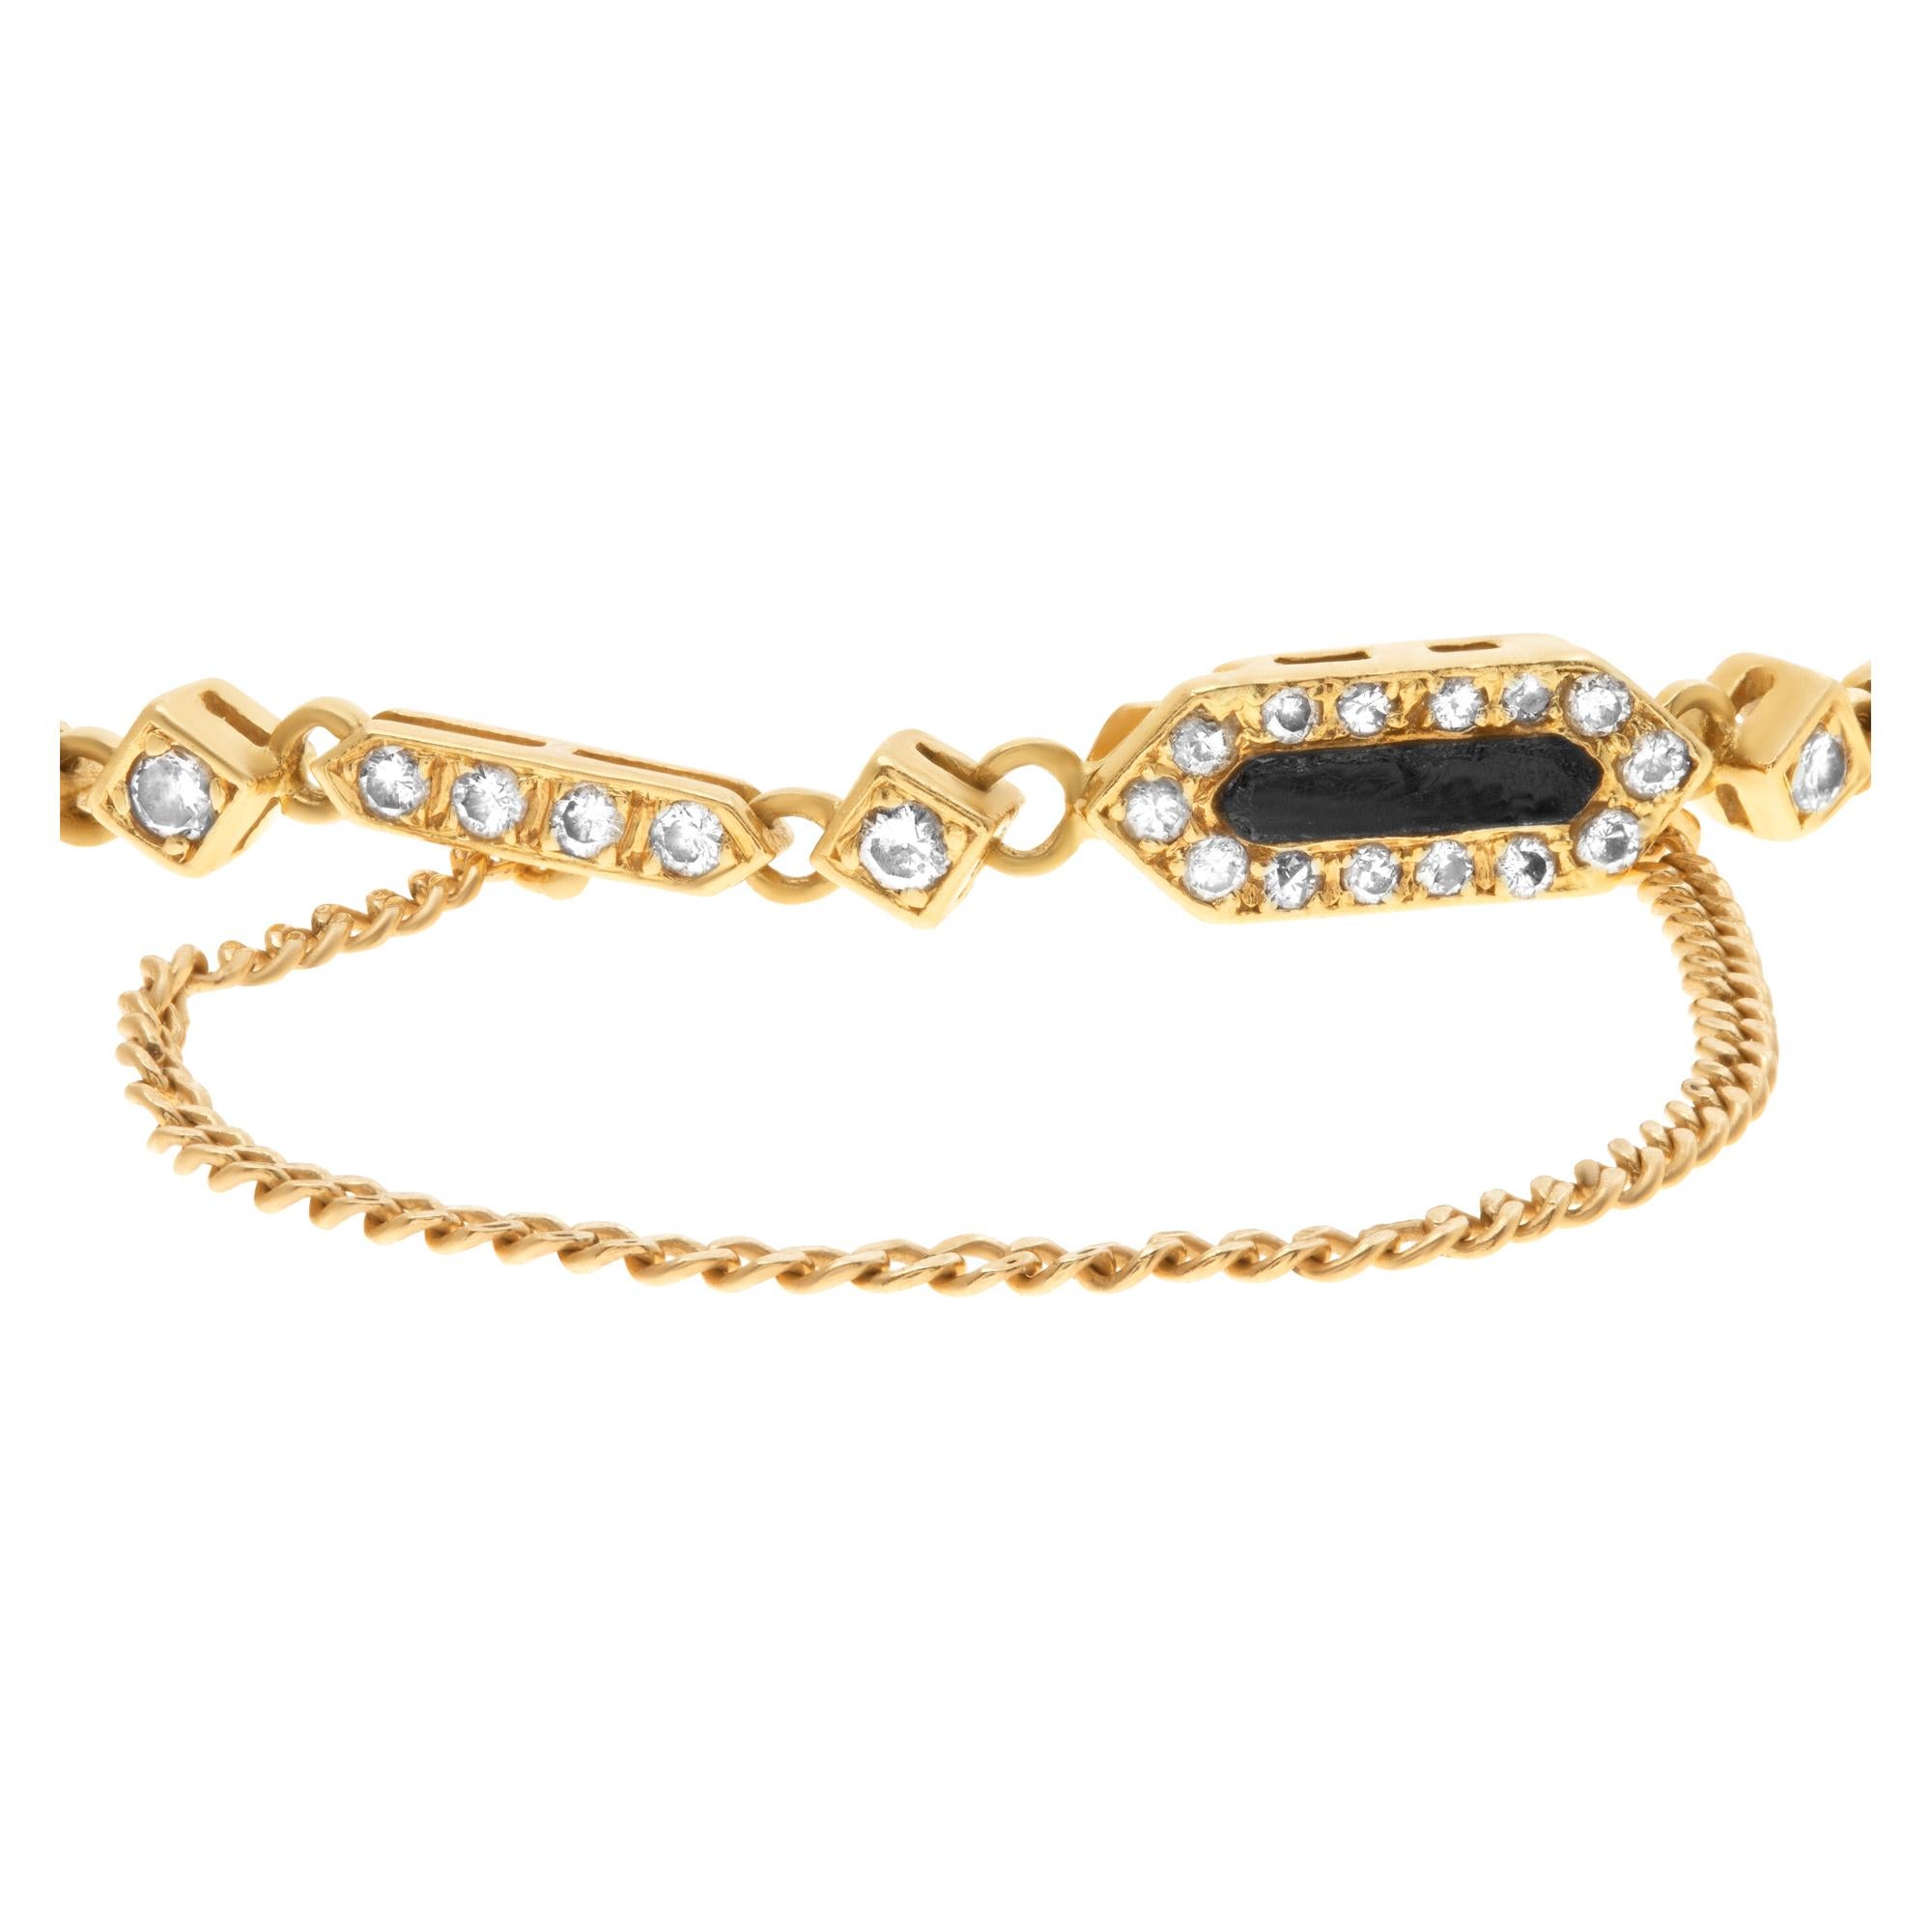 Onyx and Diamond Bracelet in 18k Gold, with Approximately 1.50 Carat For Sale 1